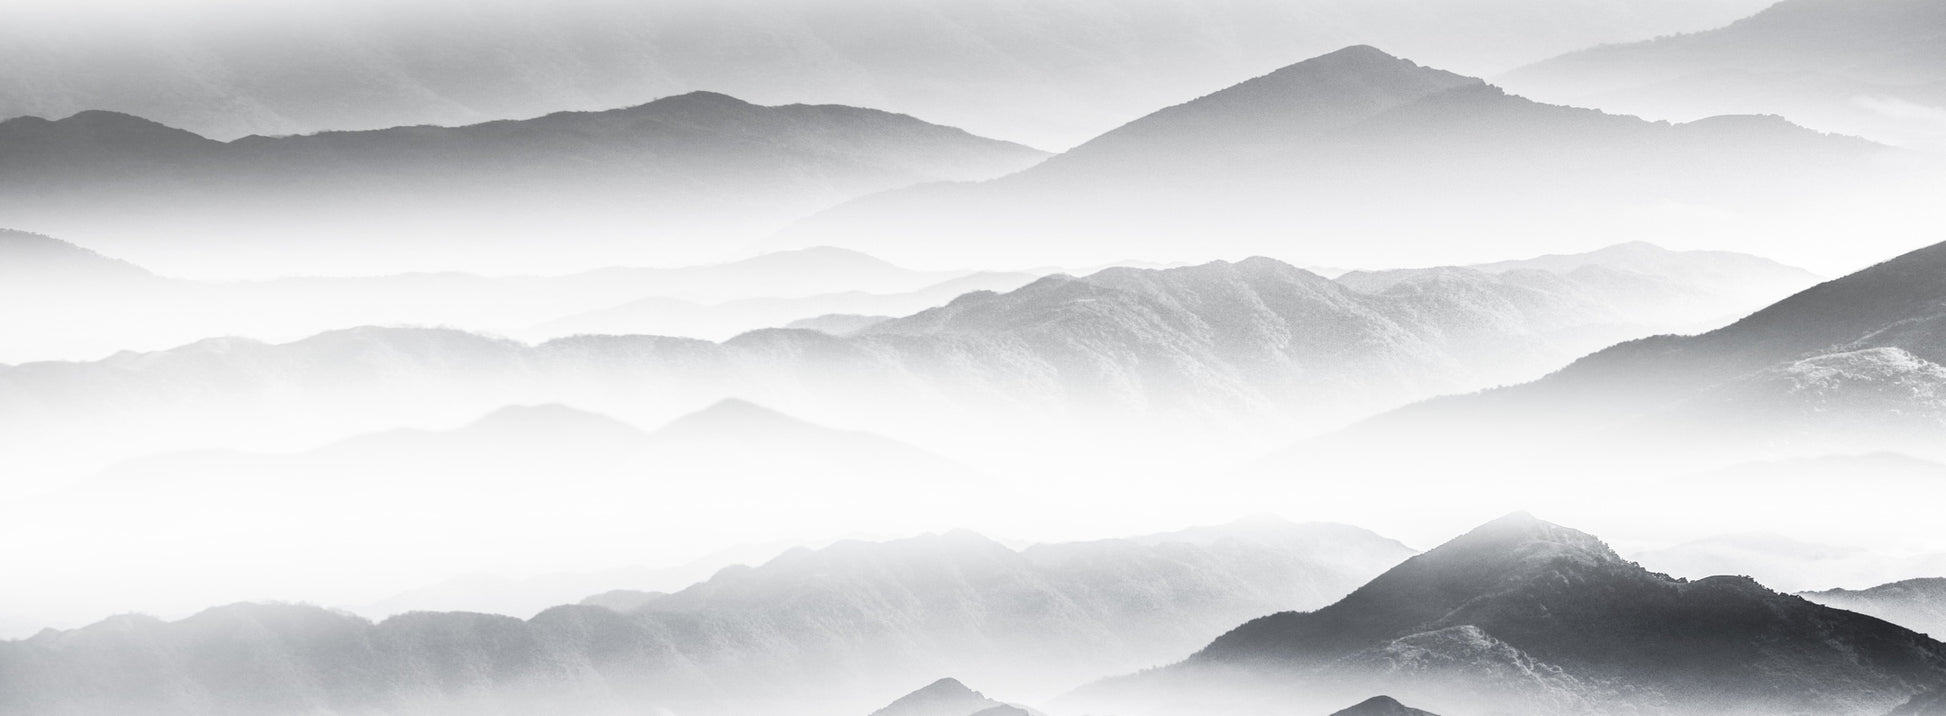 Mural of a foggy mountain landscape for use as interior design.